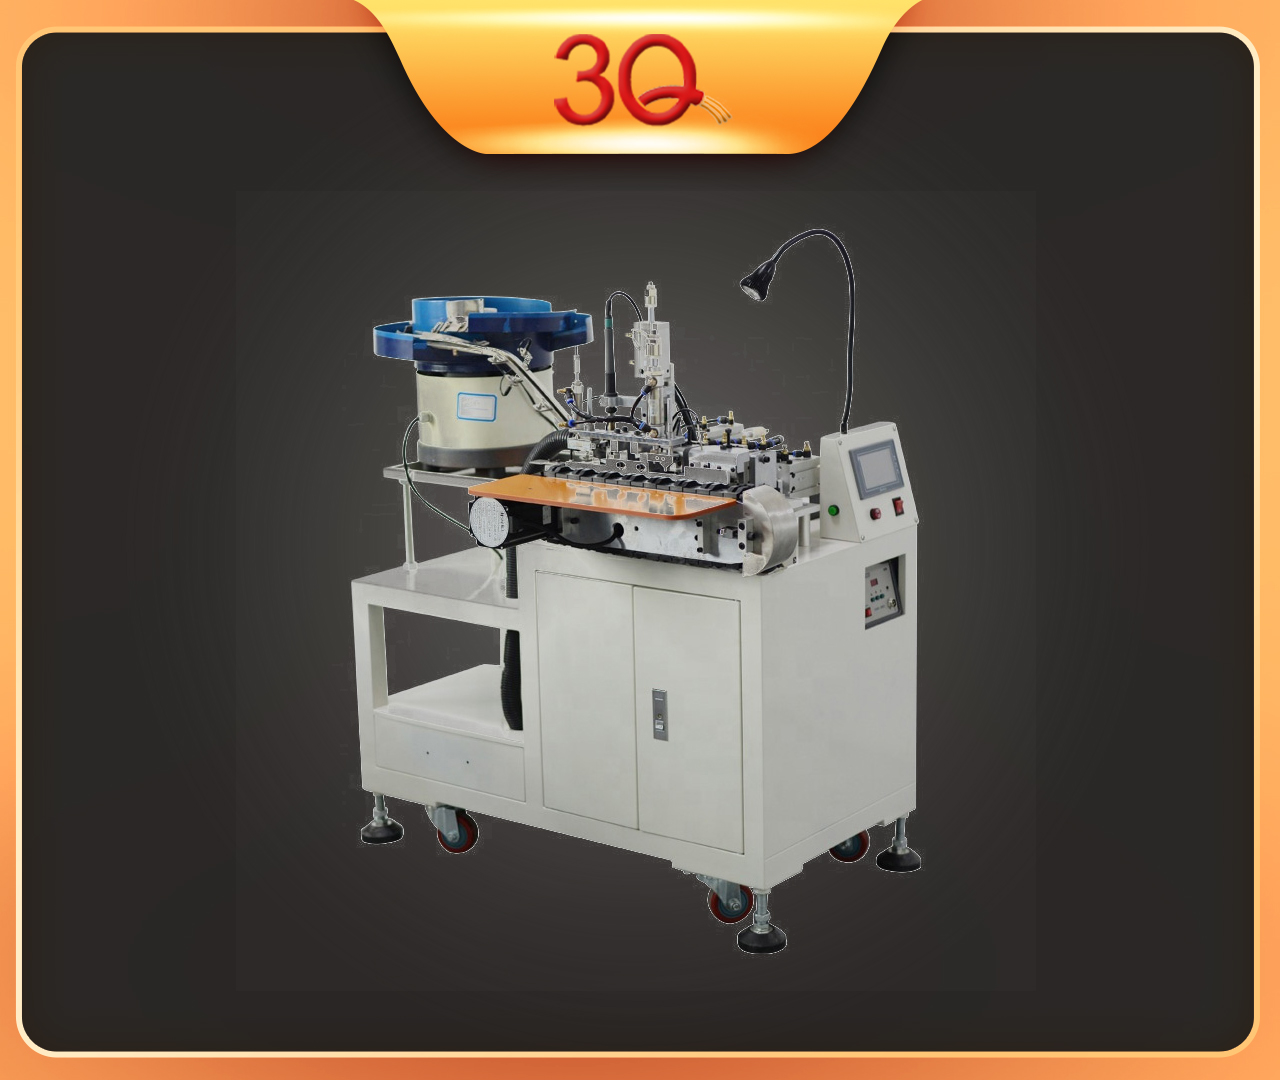 3Q Automatic Soldering Machine, USB Wire Connector Soldering Data Cable Making Machine Terminal Press Video